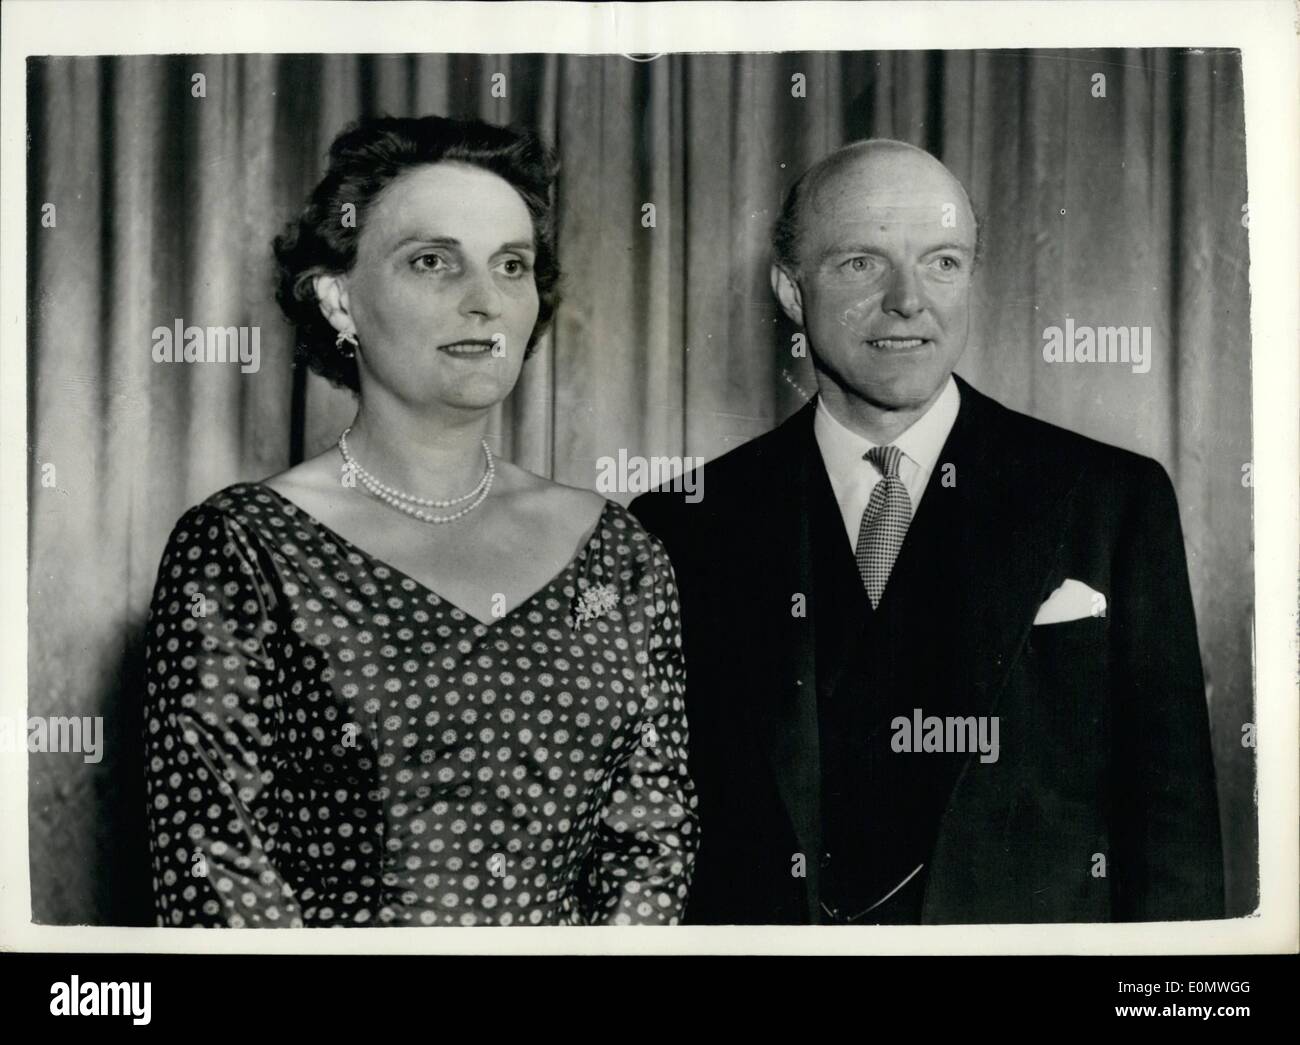 Jul. 07, 1956 - BRITISH OFFICIAL PHOTOGRAPH. CROWN COPYRIGHT RESERVED. ISSUED BY CENTRAL OFFICE OF INFORMATION. PHOTO SHOWS: SIR HAROLD CACCIA, Britain's newly appointed Ambassador in Washington, seen at his London home with his wife yesterday. Stock Photo